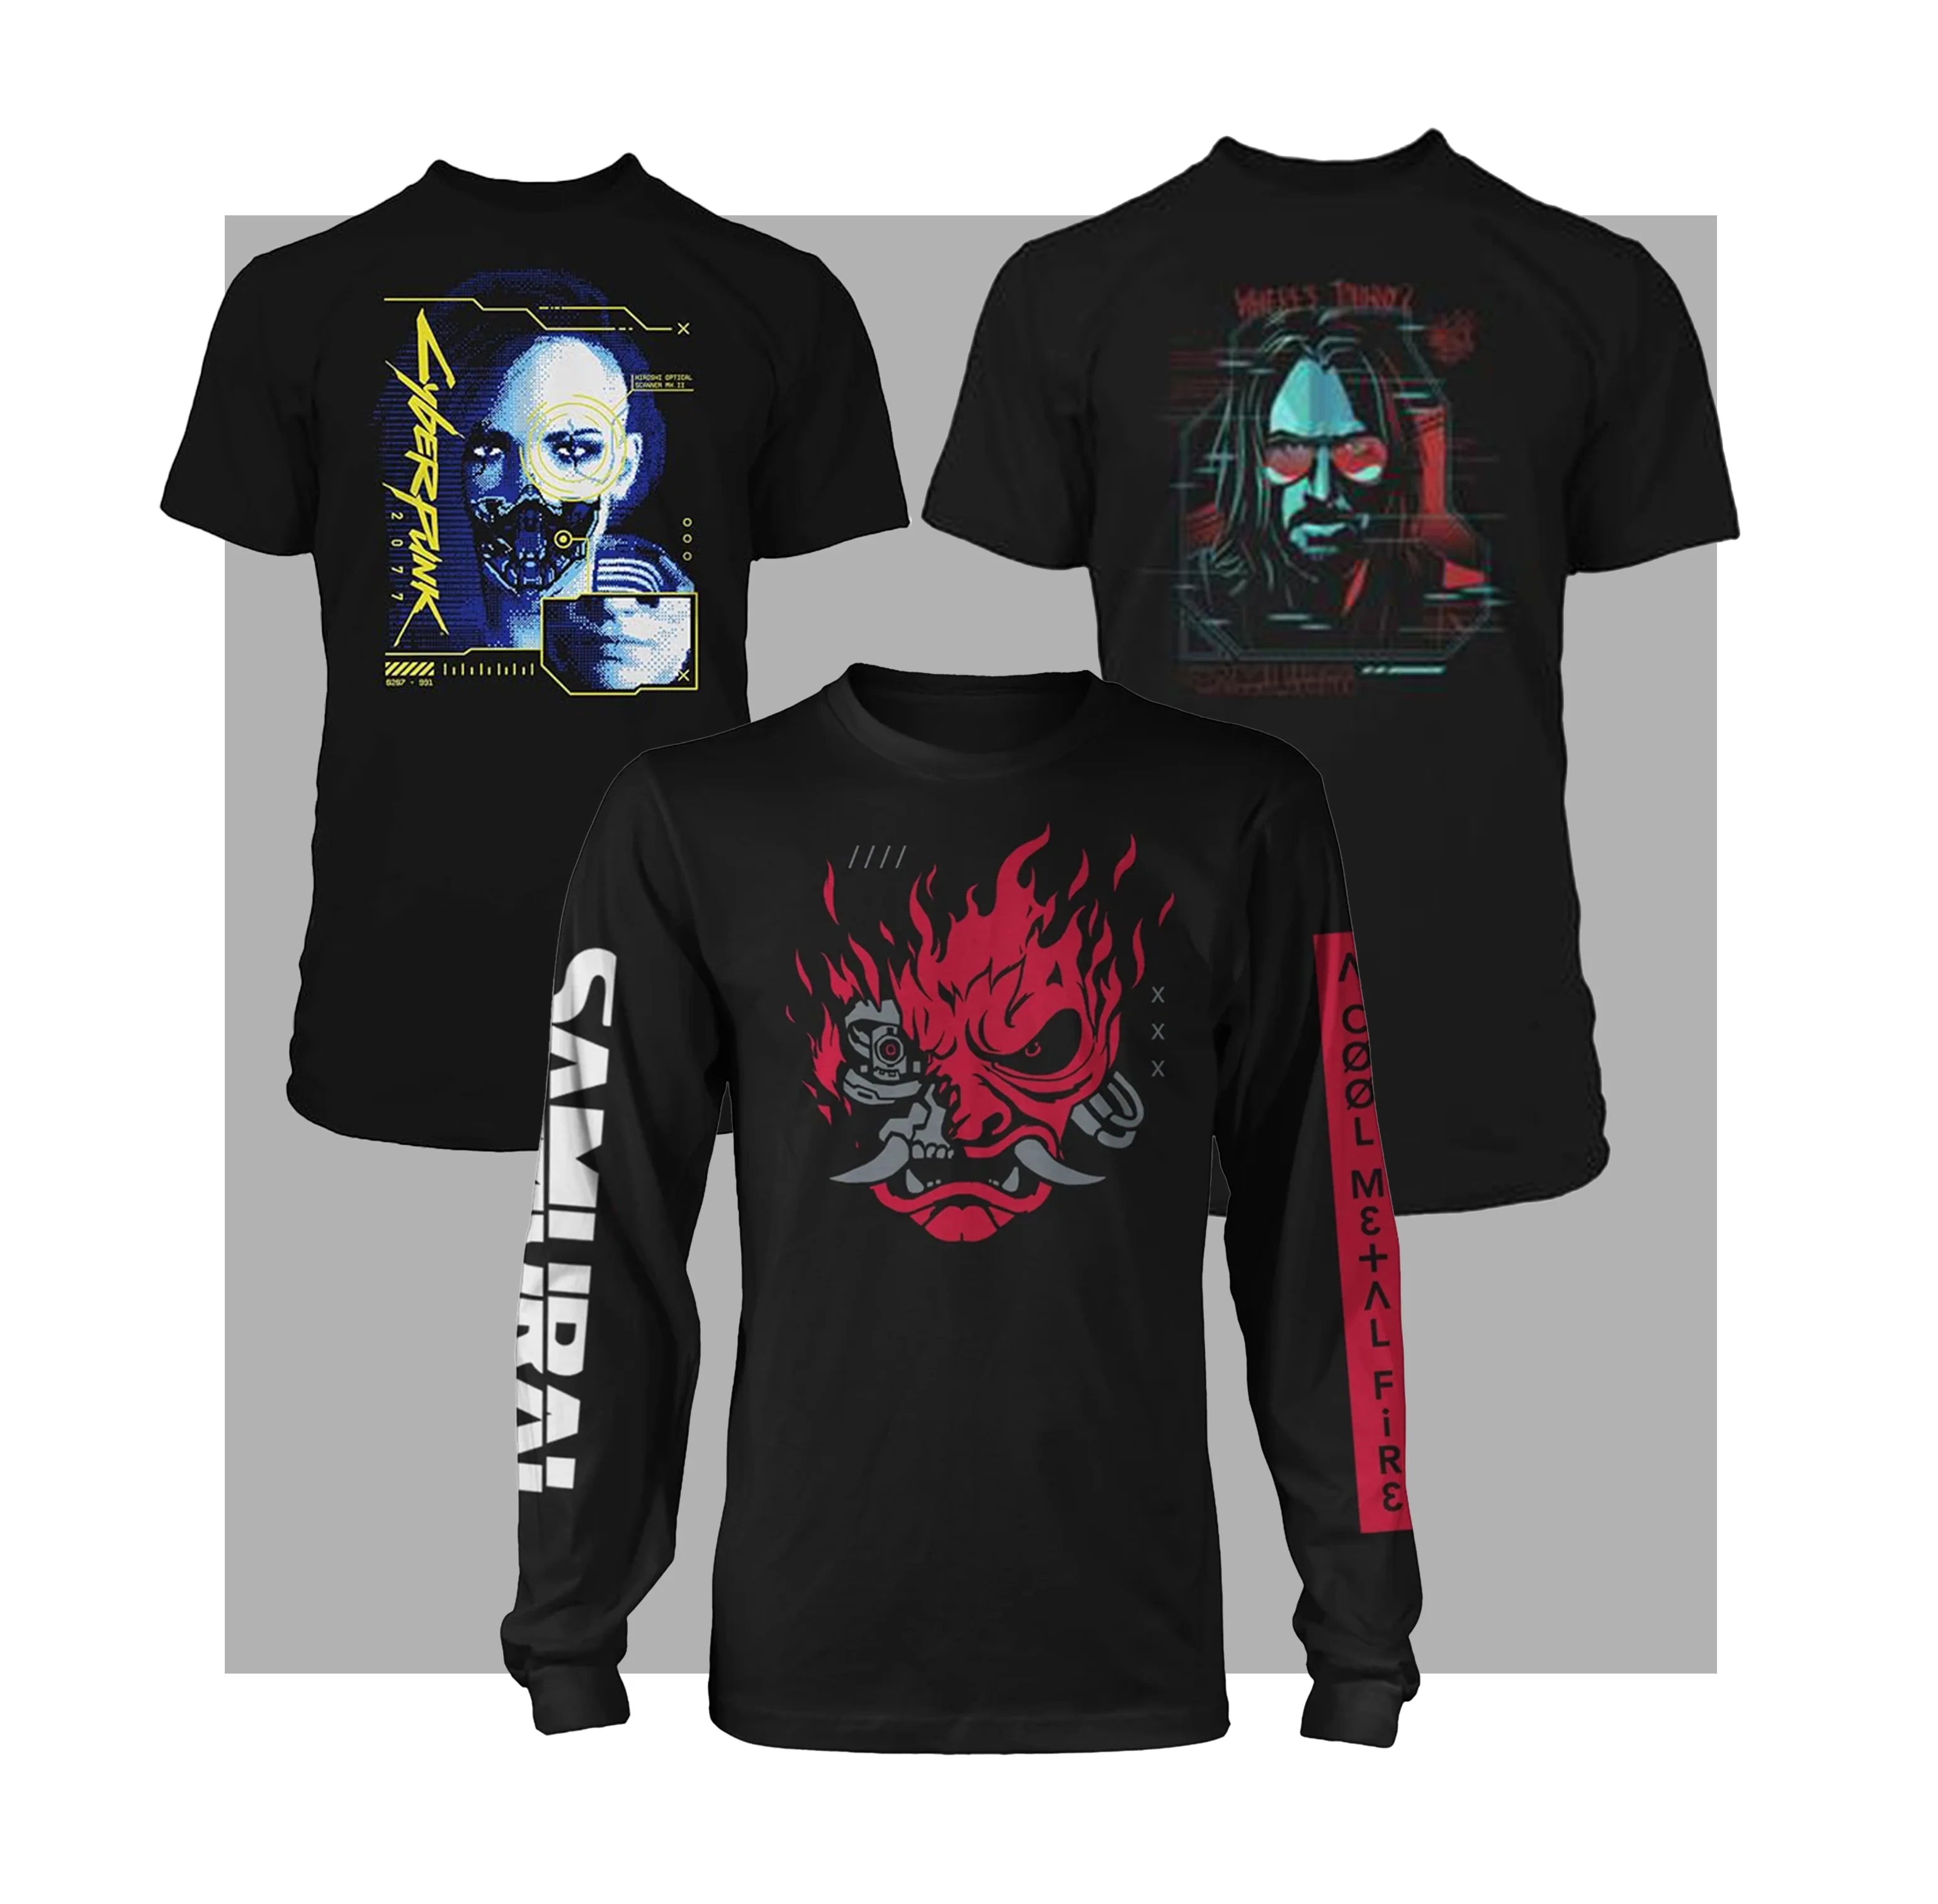 Image of three shirts one with a Cyber Samurai another with Johnny Silverhands face and a Cyber womans face.